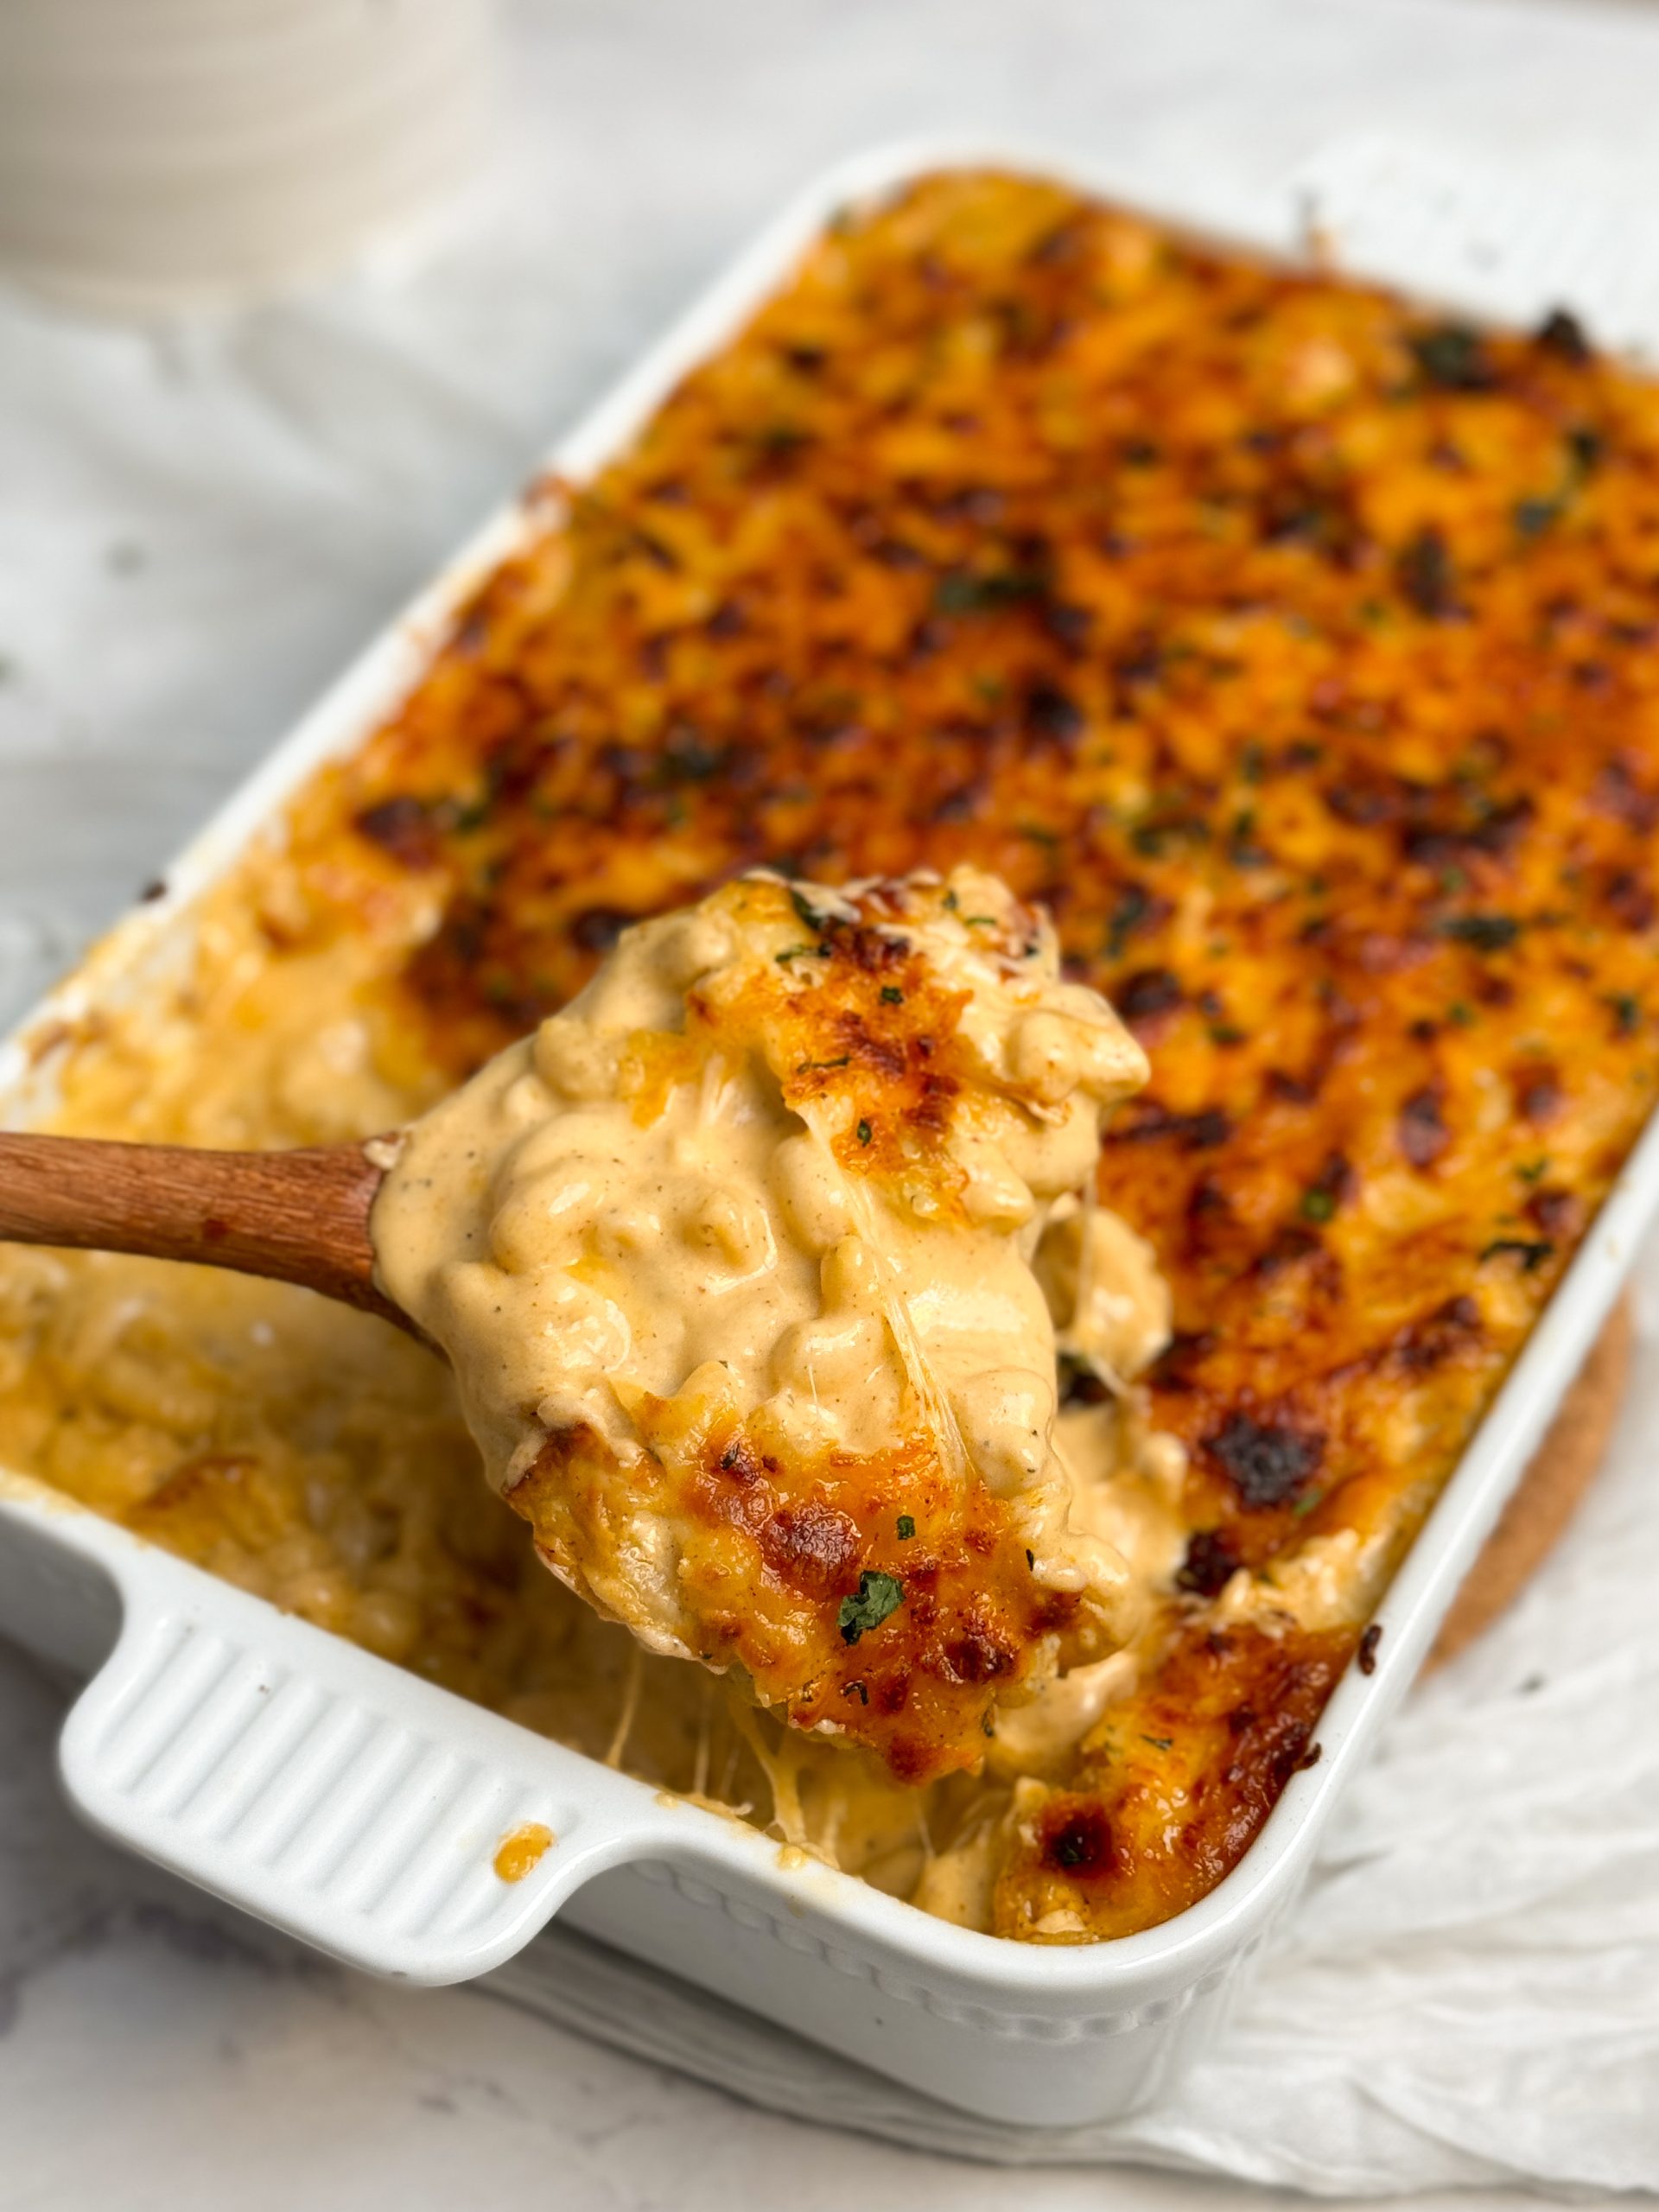 baked mac and cheese in a white casserole dish, mac and cheese is covered by a layer of golden melted cheese. A wooden spoon is scooping out some mac and cheese showing the creamy cheesy texture inside. picture from an angle